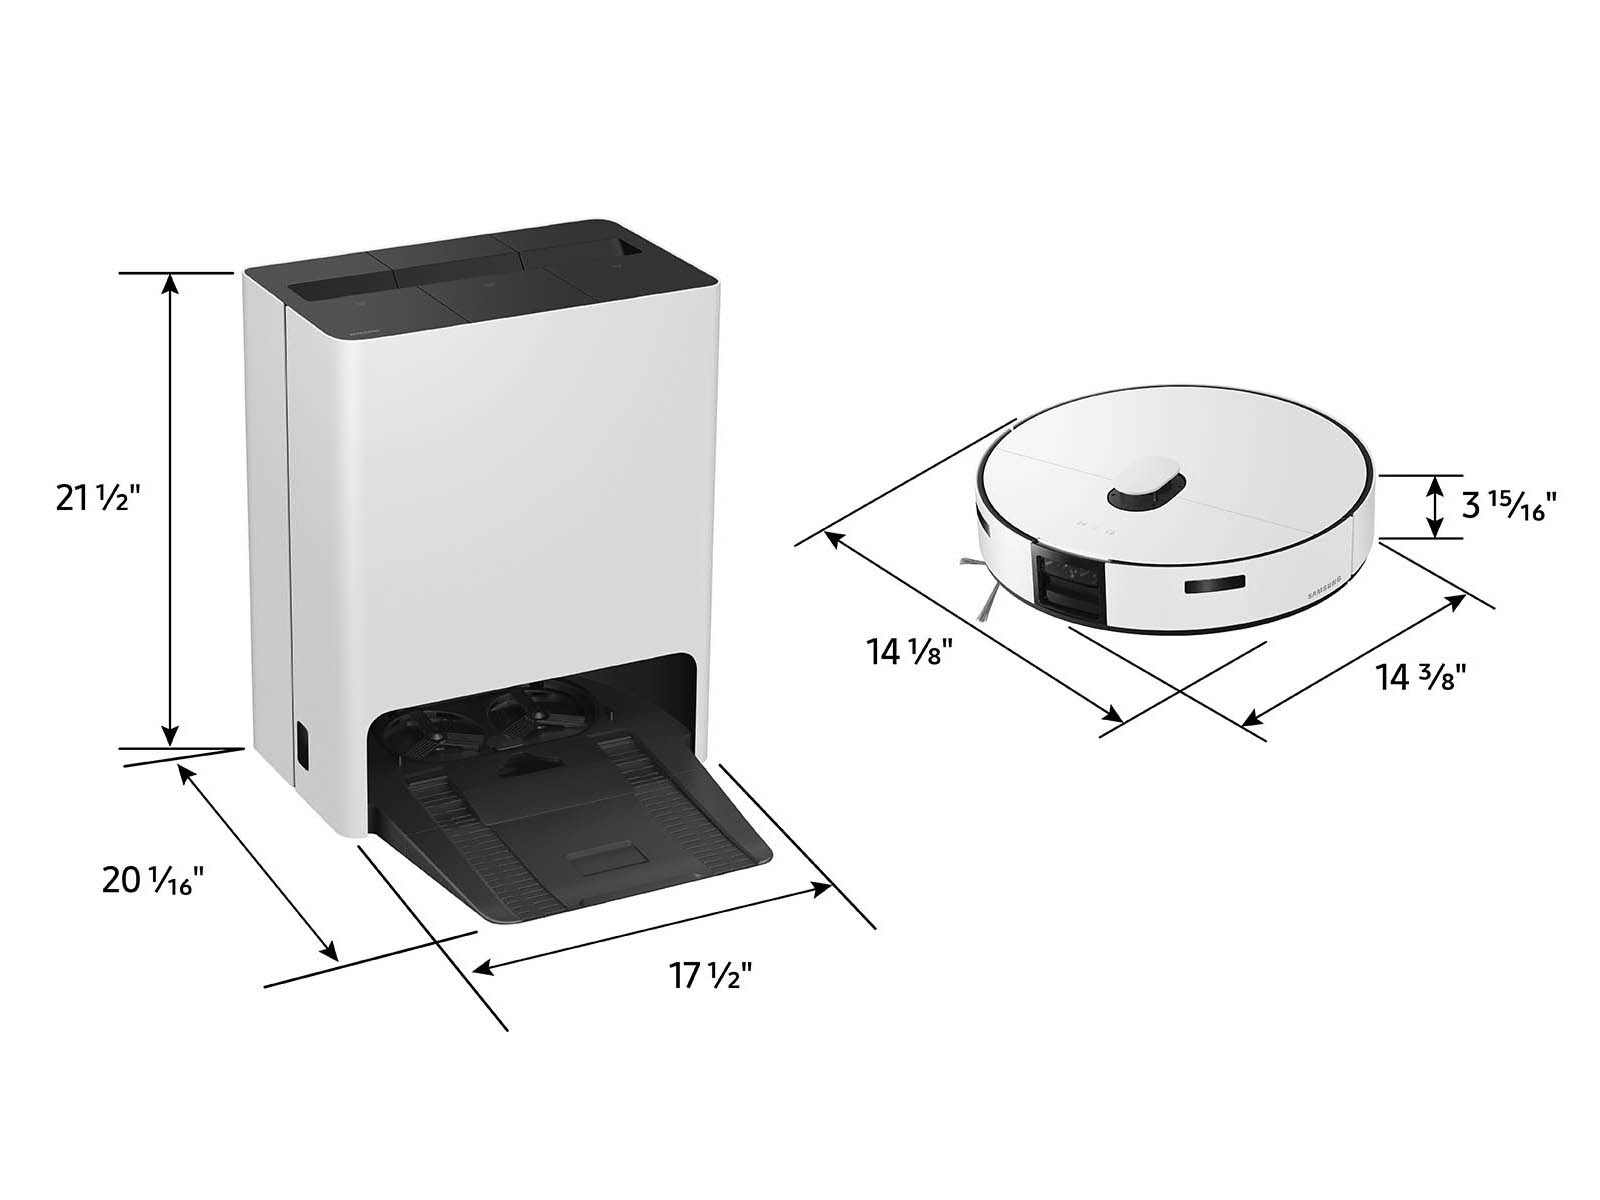 Thumbnail image of Bespoke Jet Bot Combo™ AI Robot Vacuum and Mop with All-in-One Clean Station® with Auto Steam